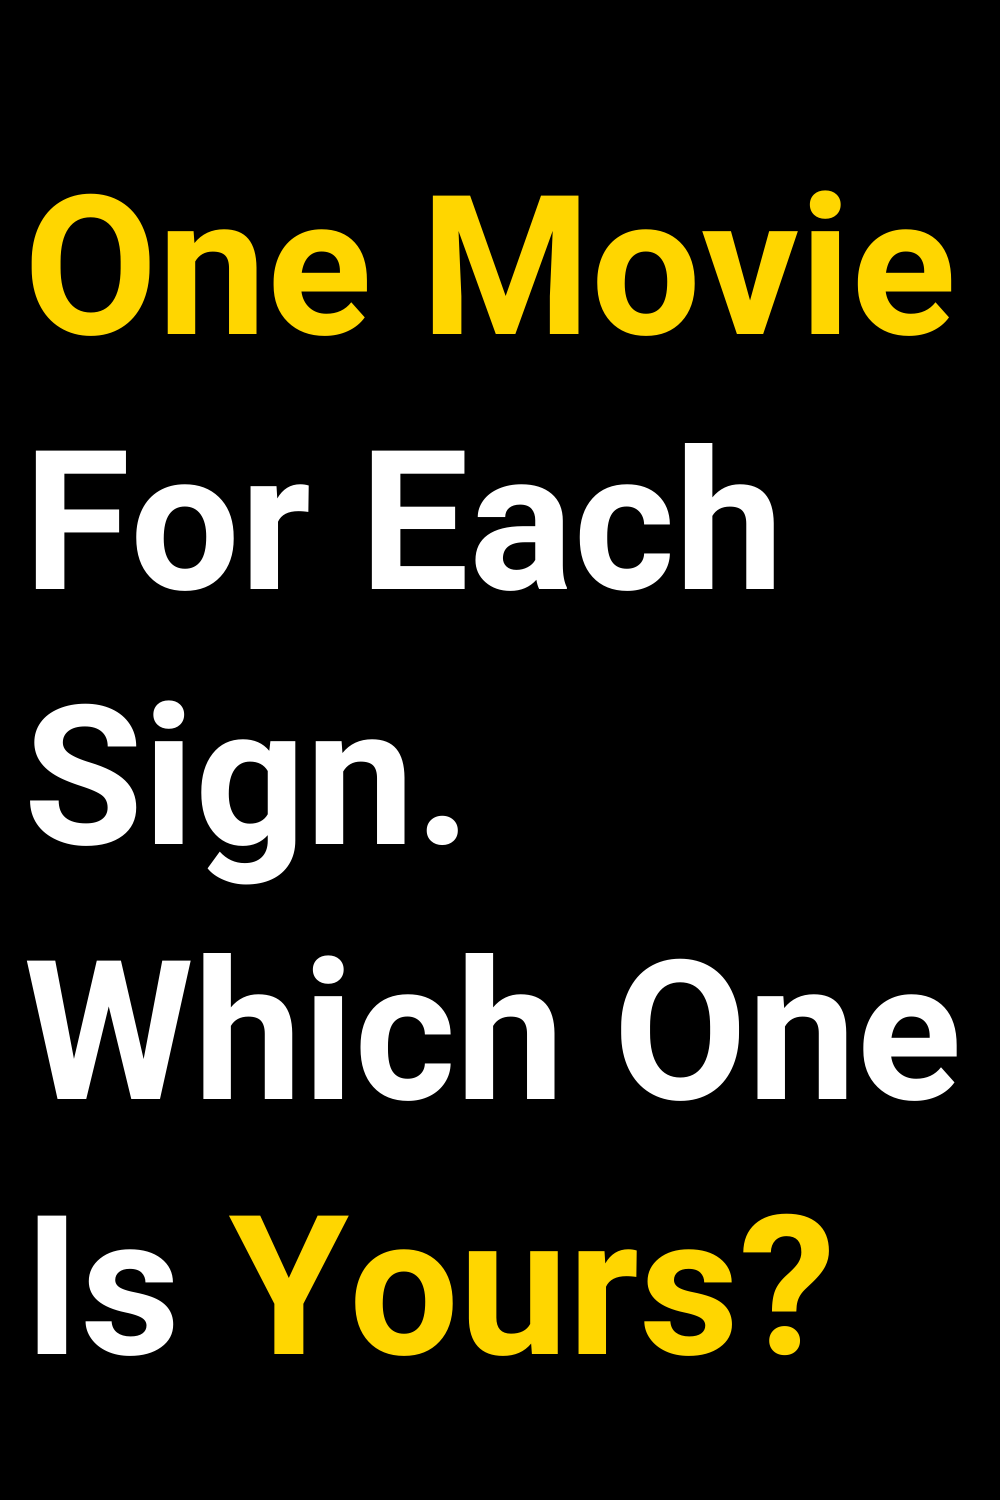 One Movie For Each Sign. Which One Is Yours?